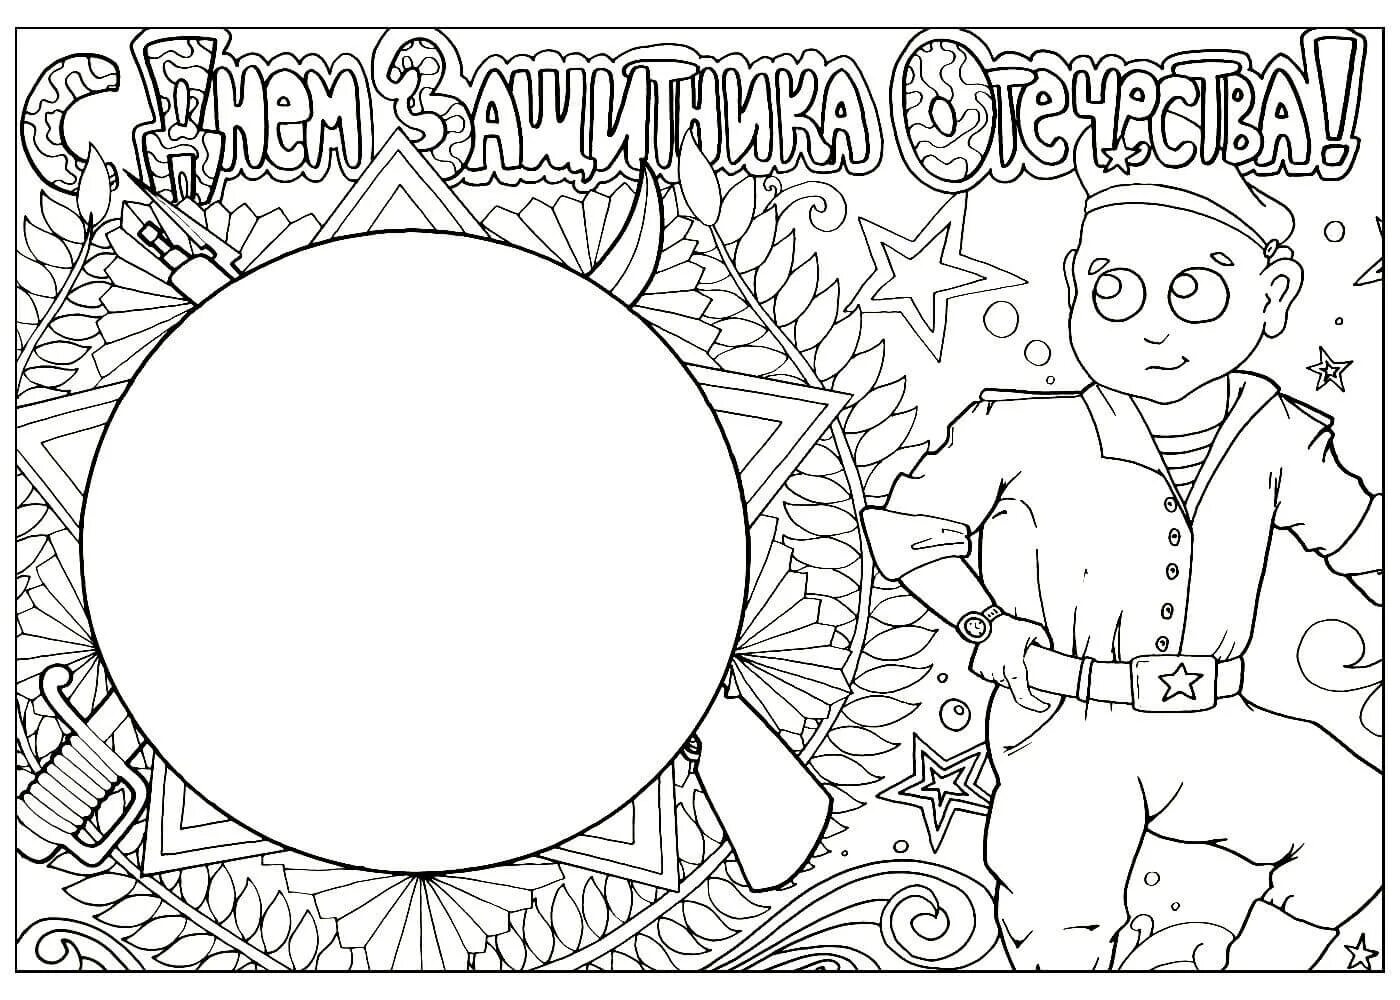 Unique wall newspaper coloring page